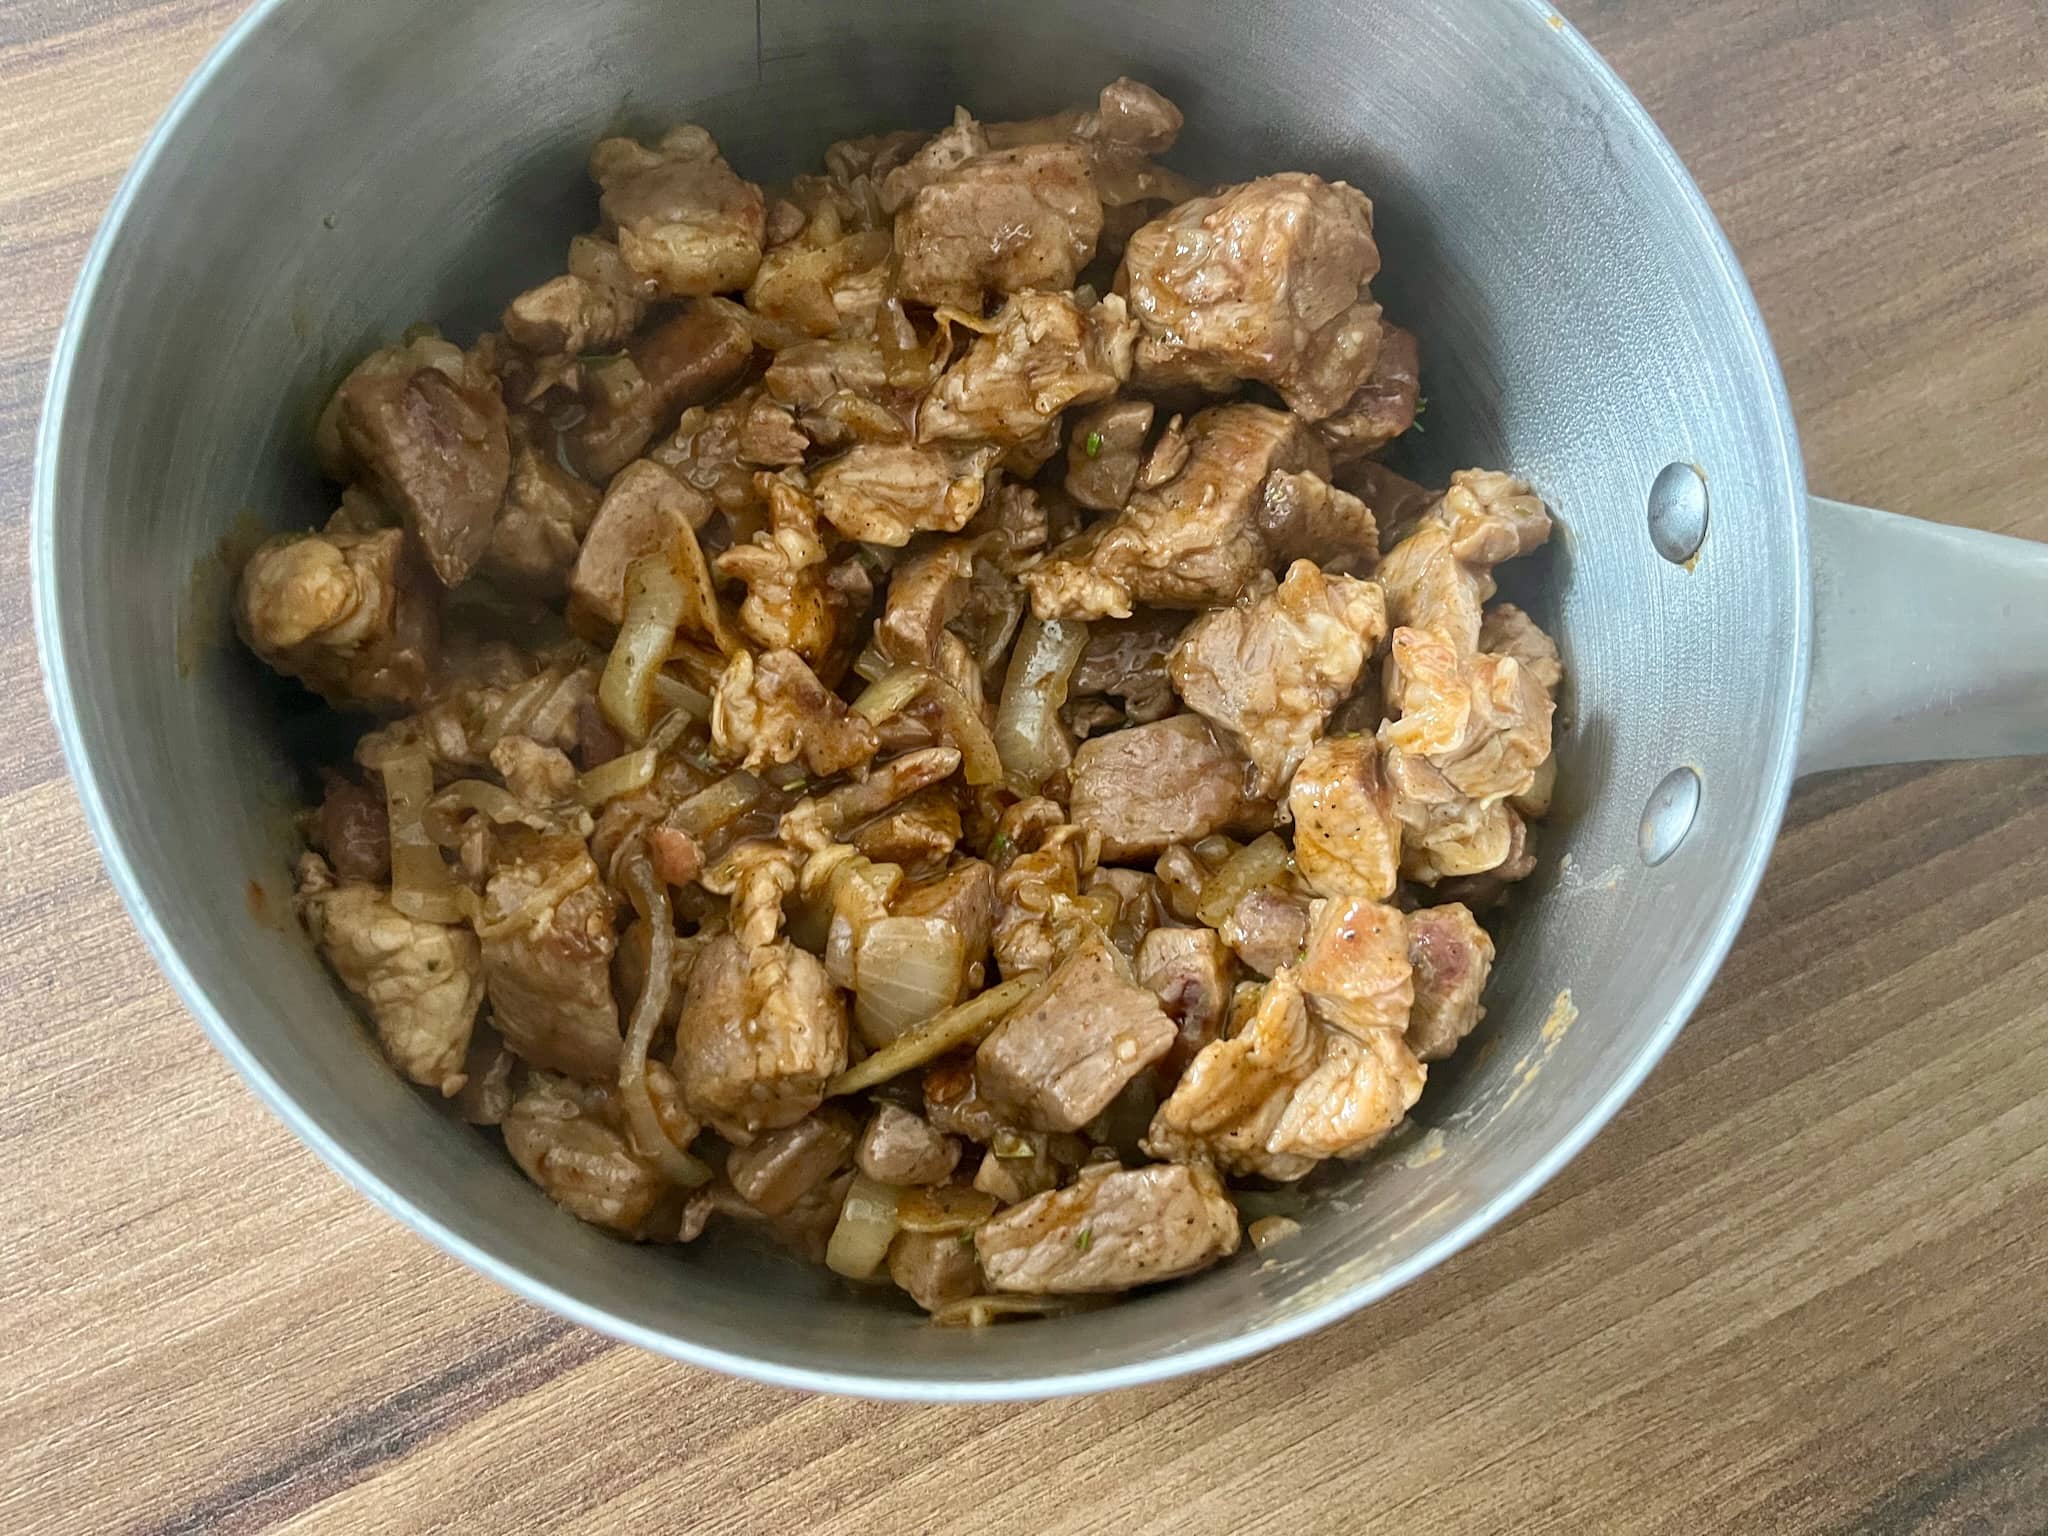 Cooked pork placed into a saucepan